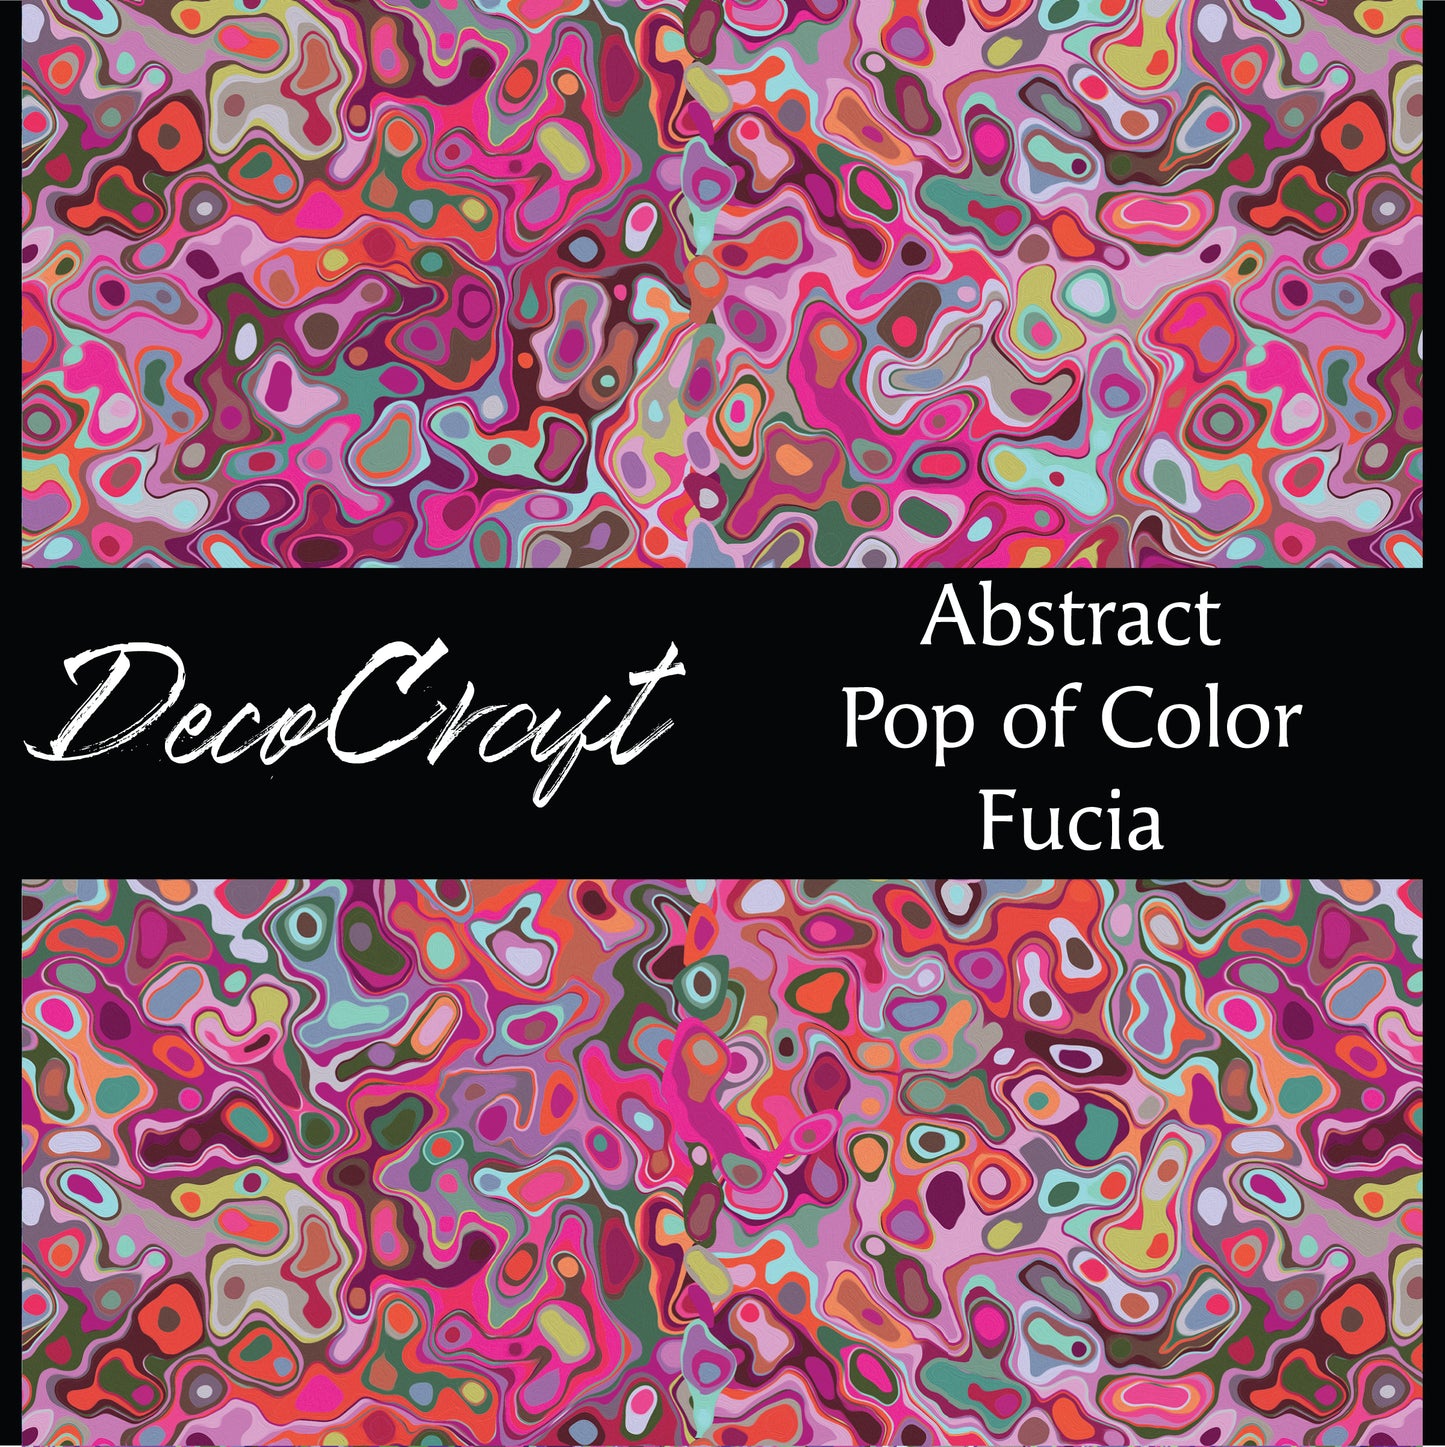 DecoCraft - Abstract - Pop of Color - Fuchsia